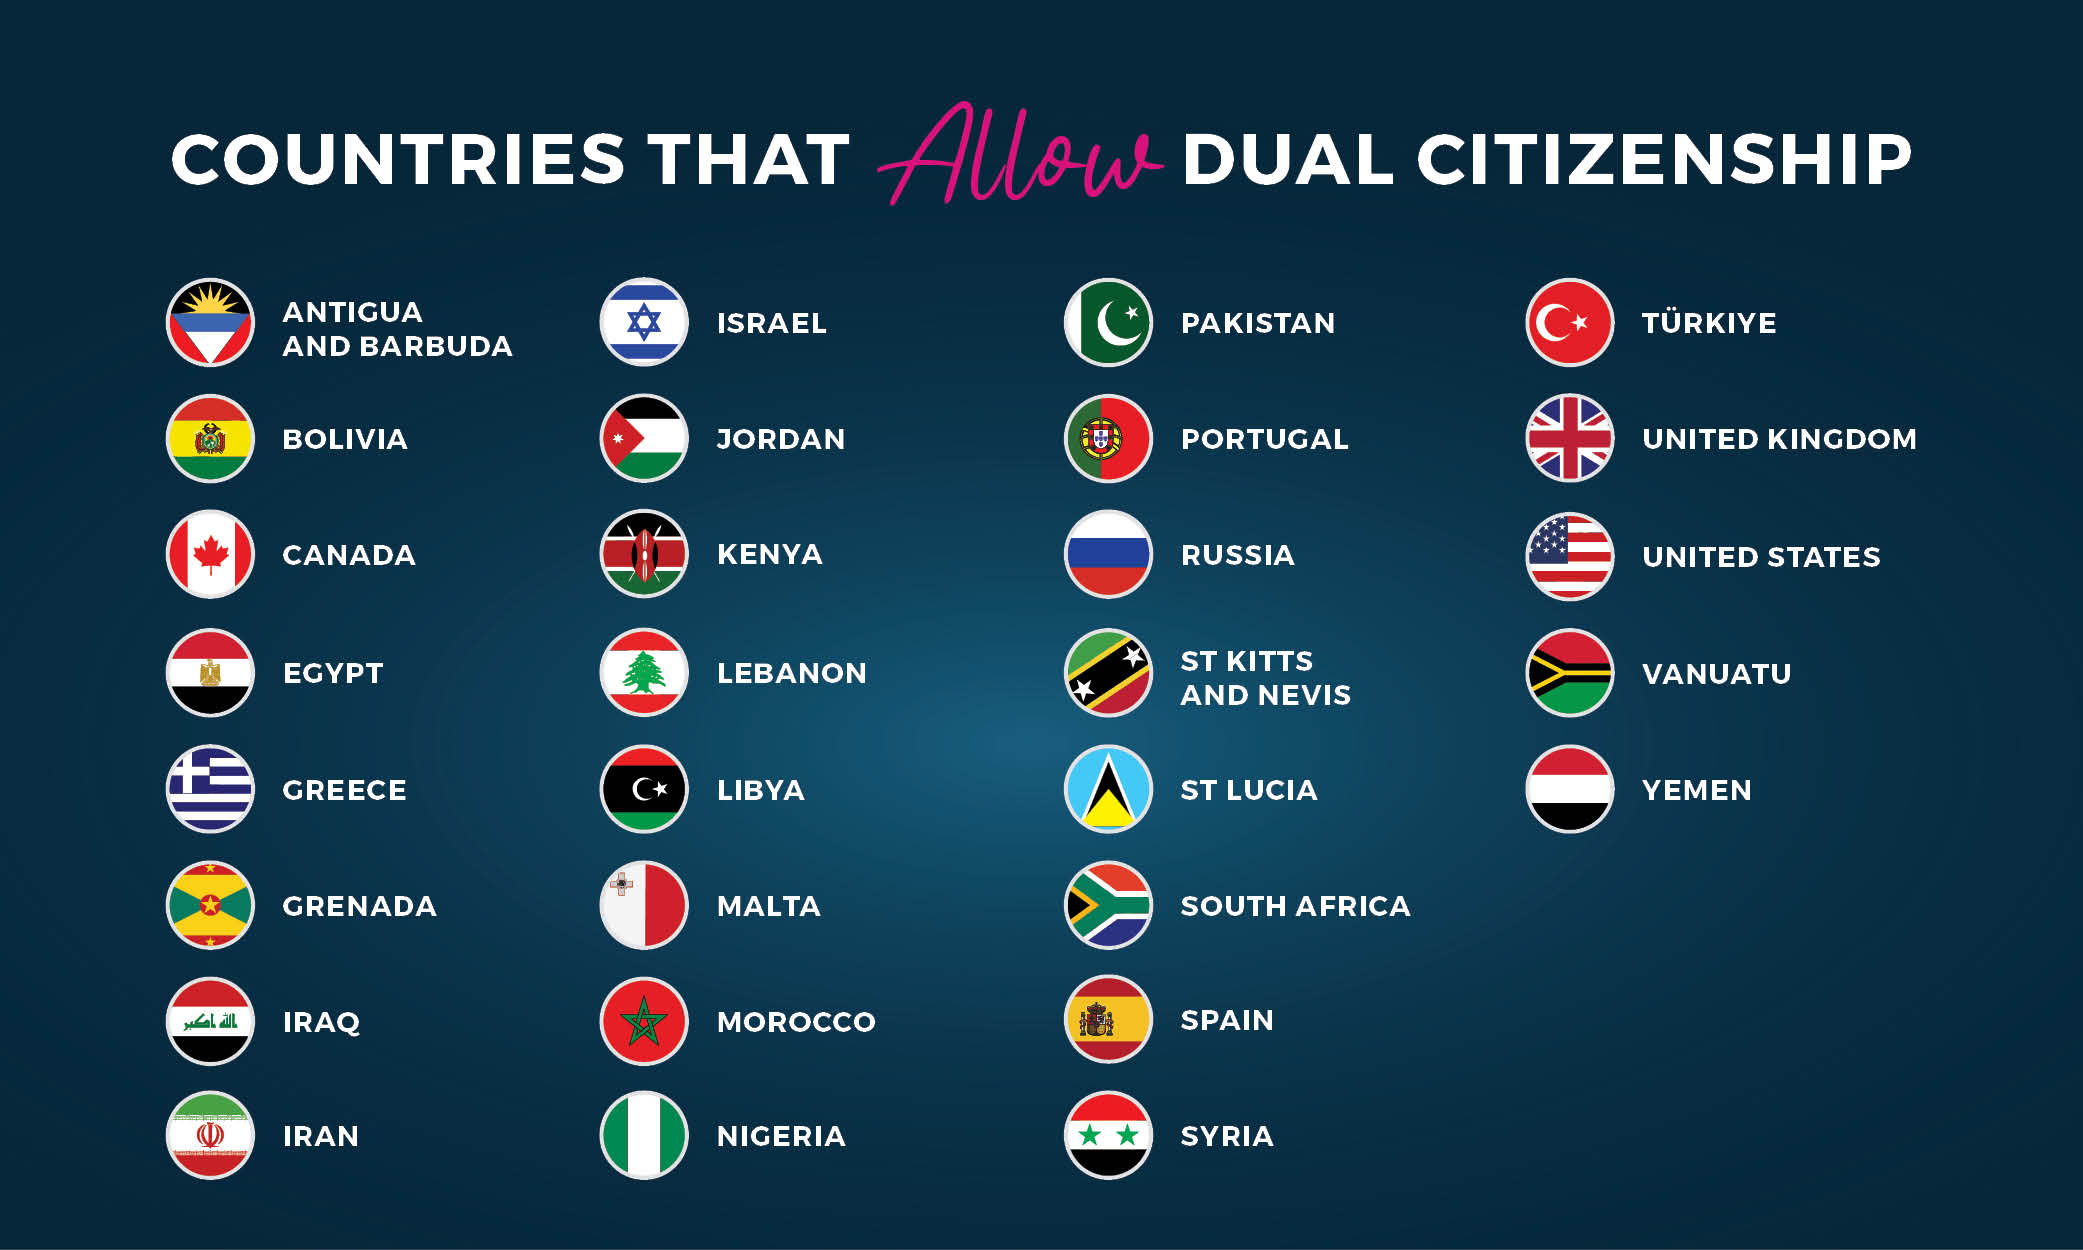 Learn about countries that allow dual citizenship.